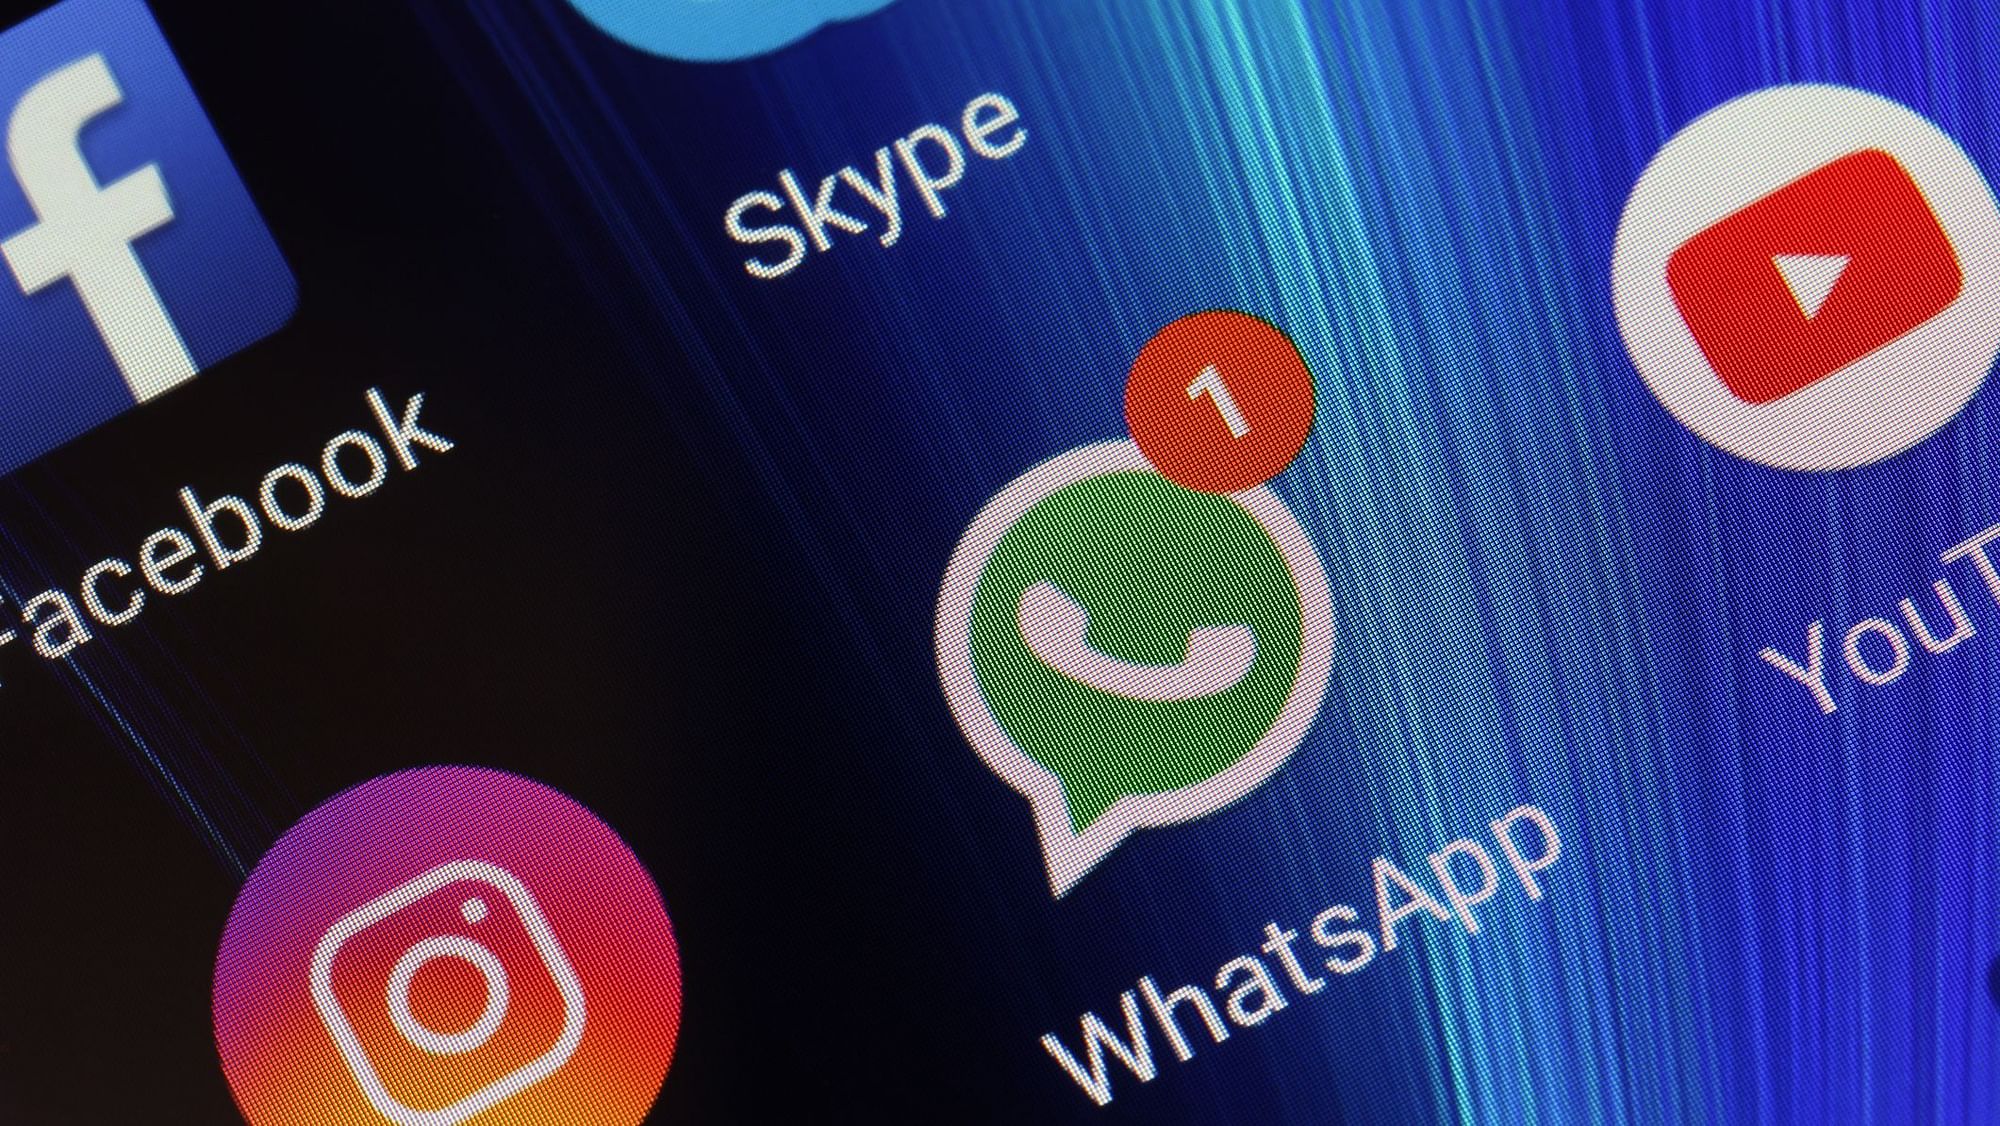 WhatsApp will be getting a slew of new features in 2019.